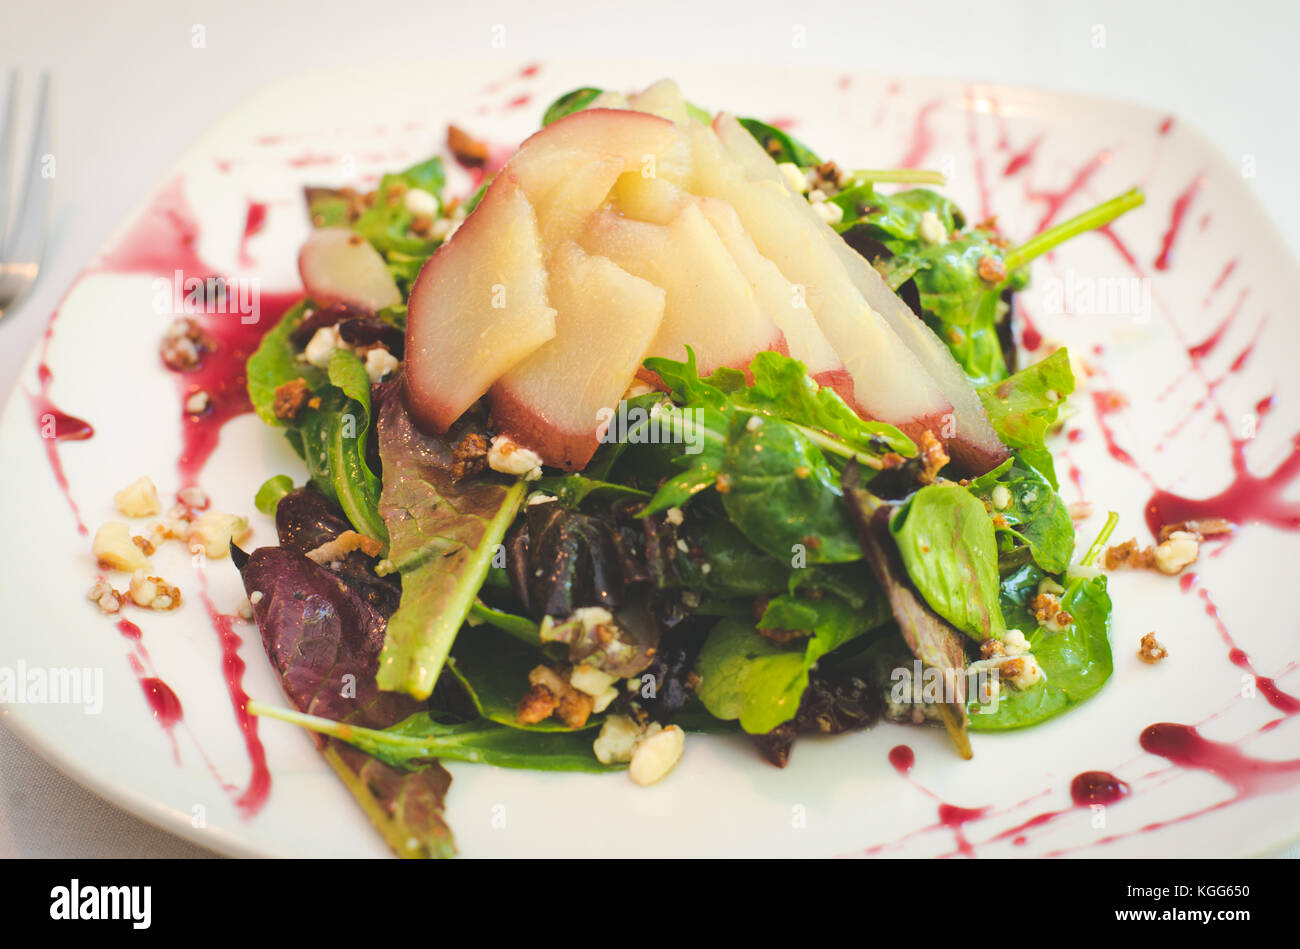 A salad with pears and produce on a plate in a restaurant. Stock Photo